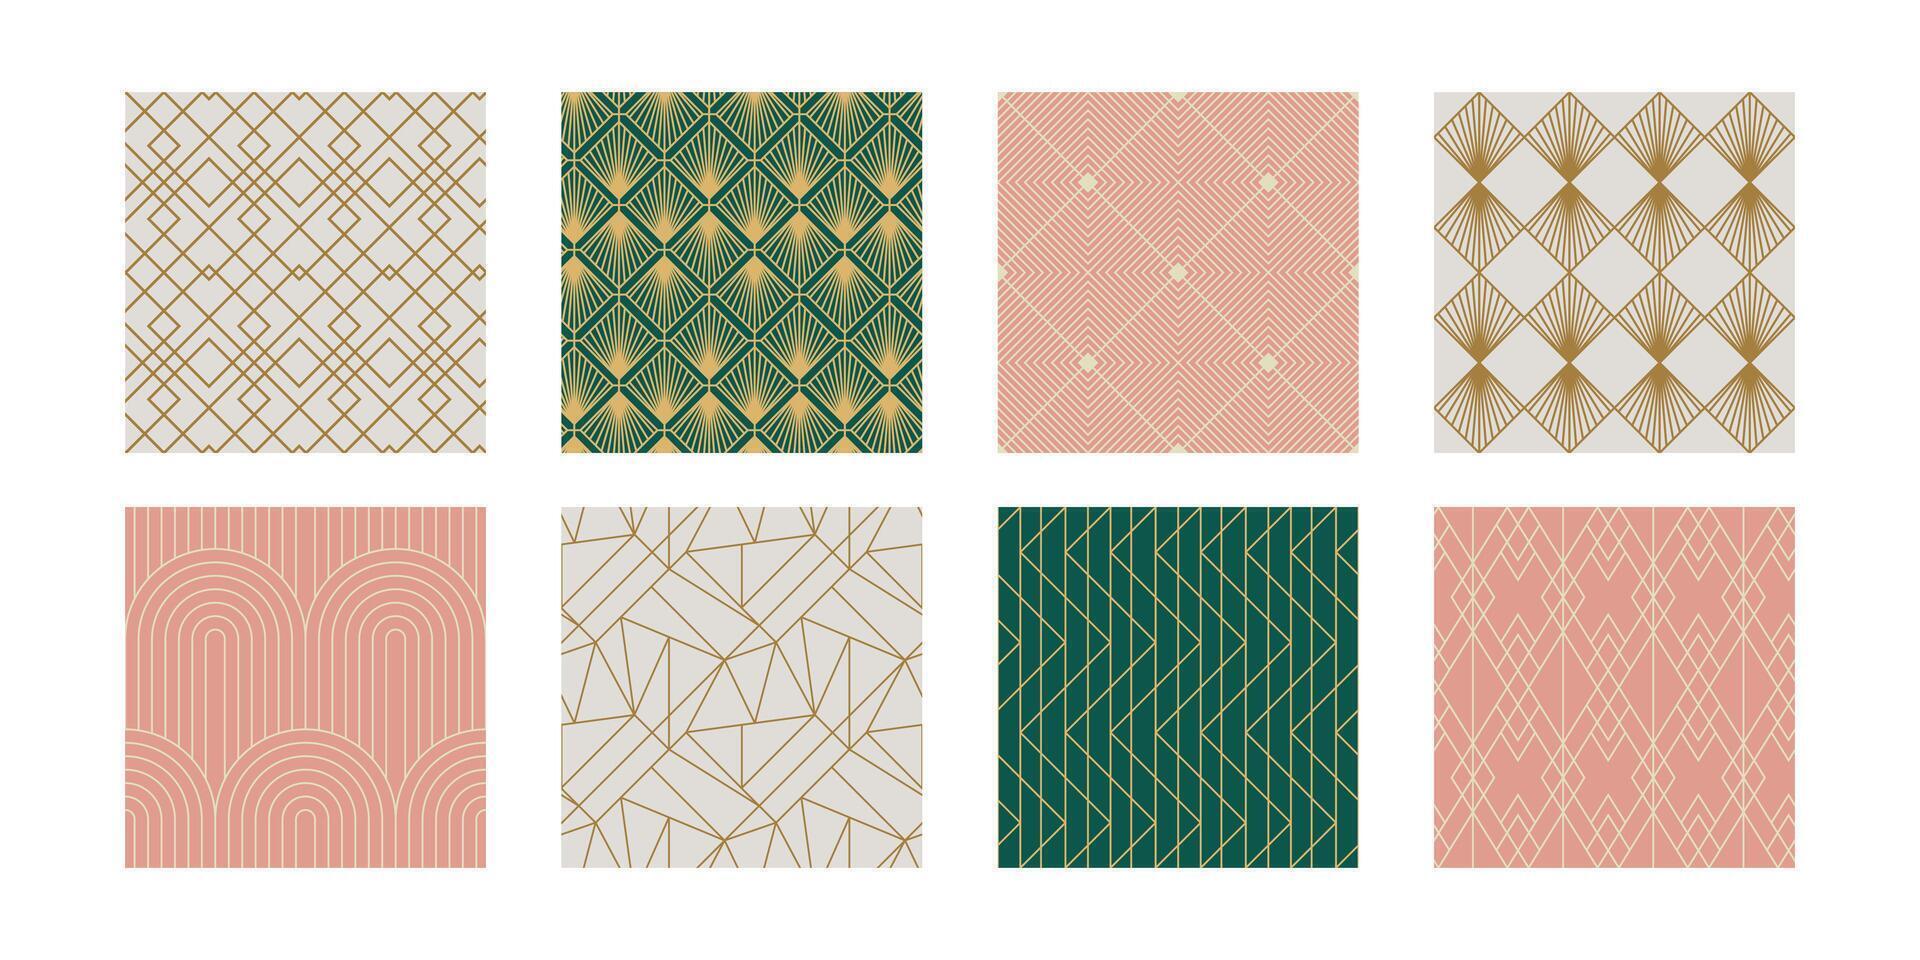 Set of Vintage Art Deco Seamless Pattern. Line art geometric gold shapes. Modern ornaments vector illustration. Gatsby retro elegant background for fabric, wallpaper or wrapping